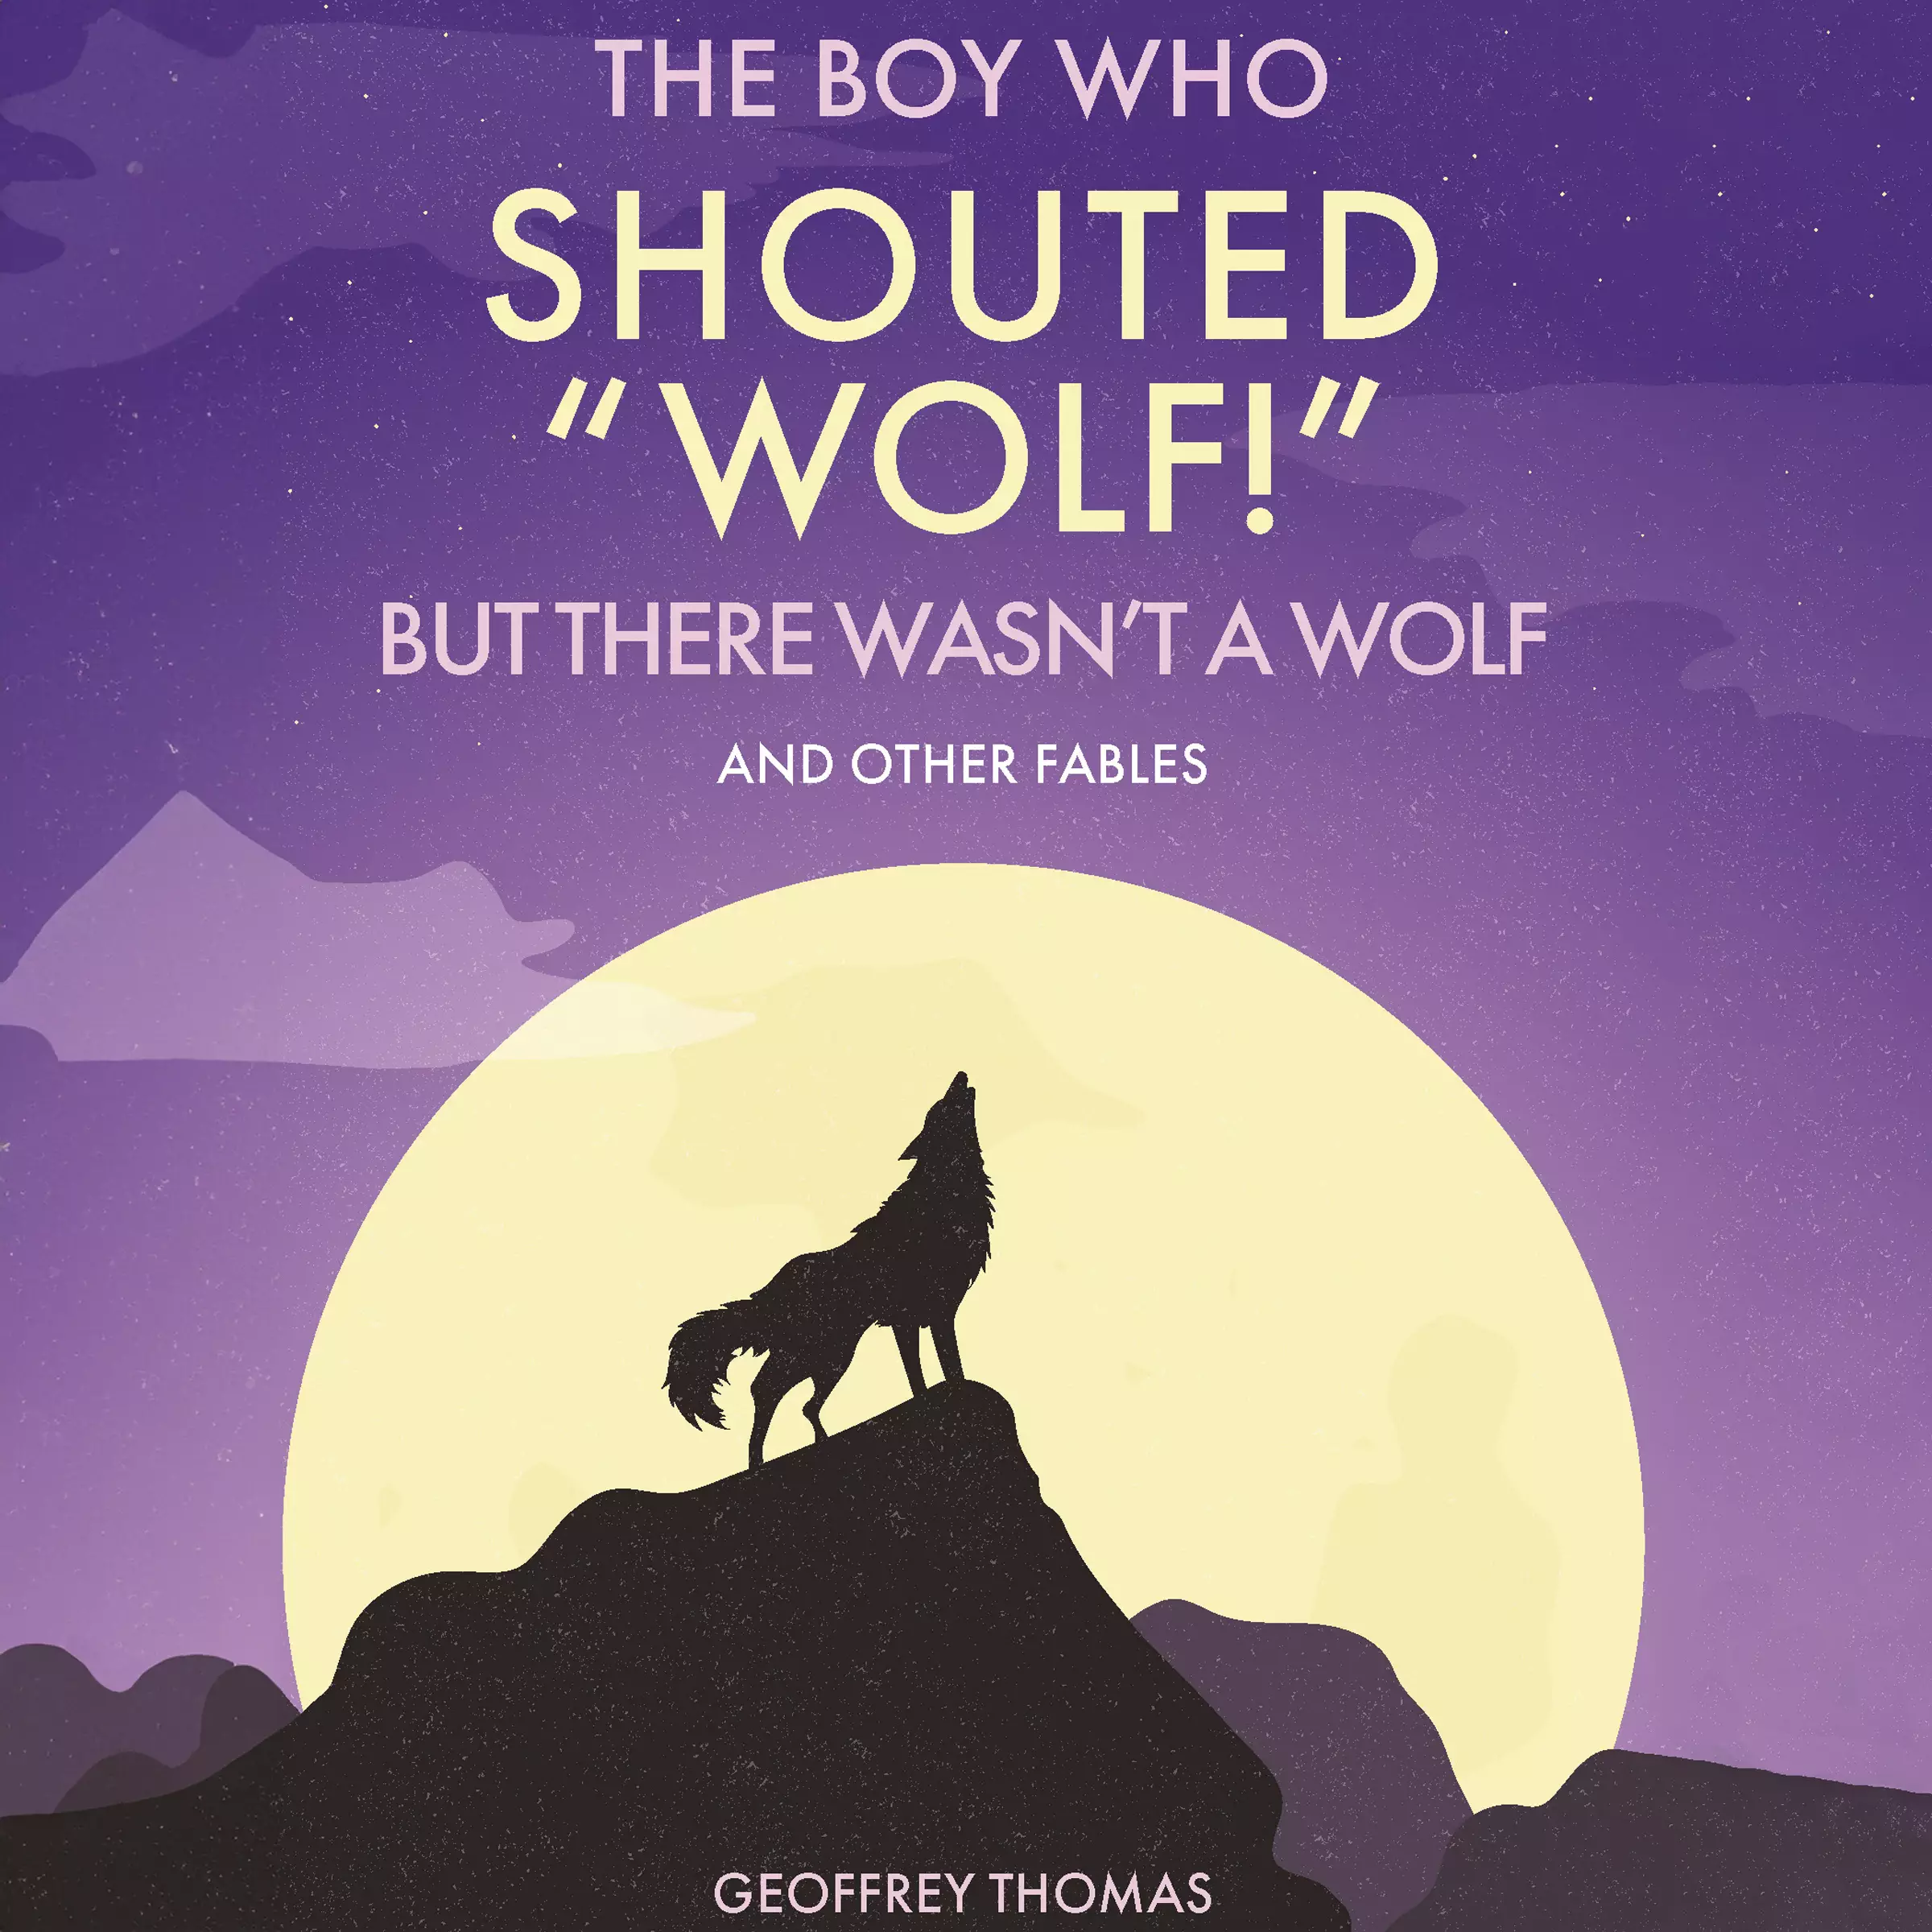 The Boy Who Shouted “Wolf!” But There Wasn’t A Wolf